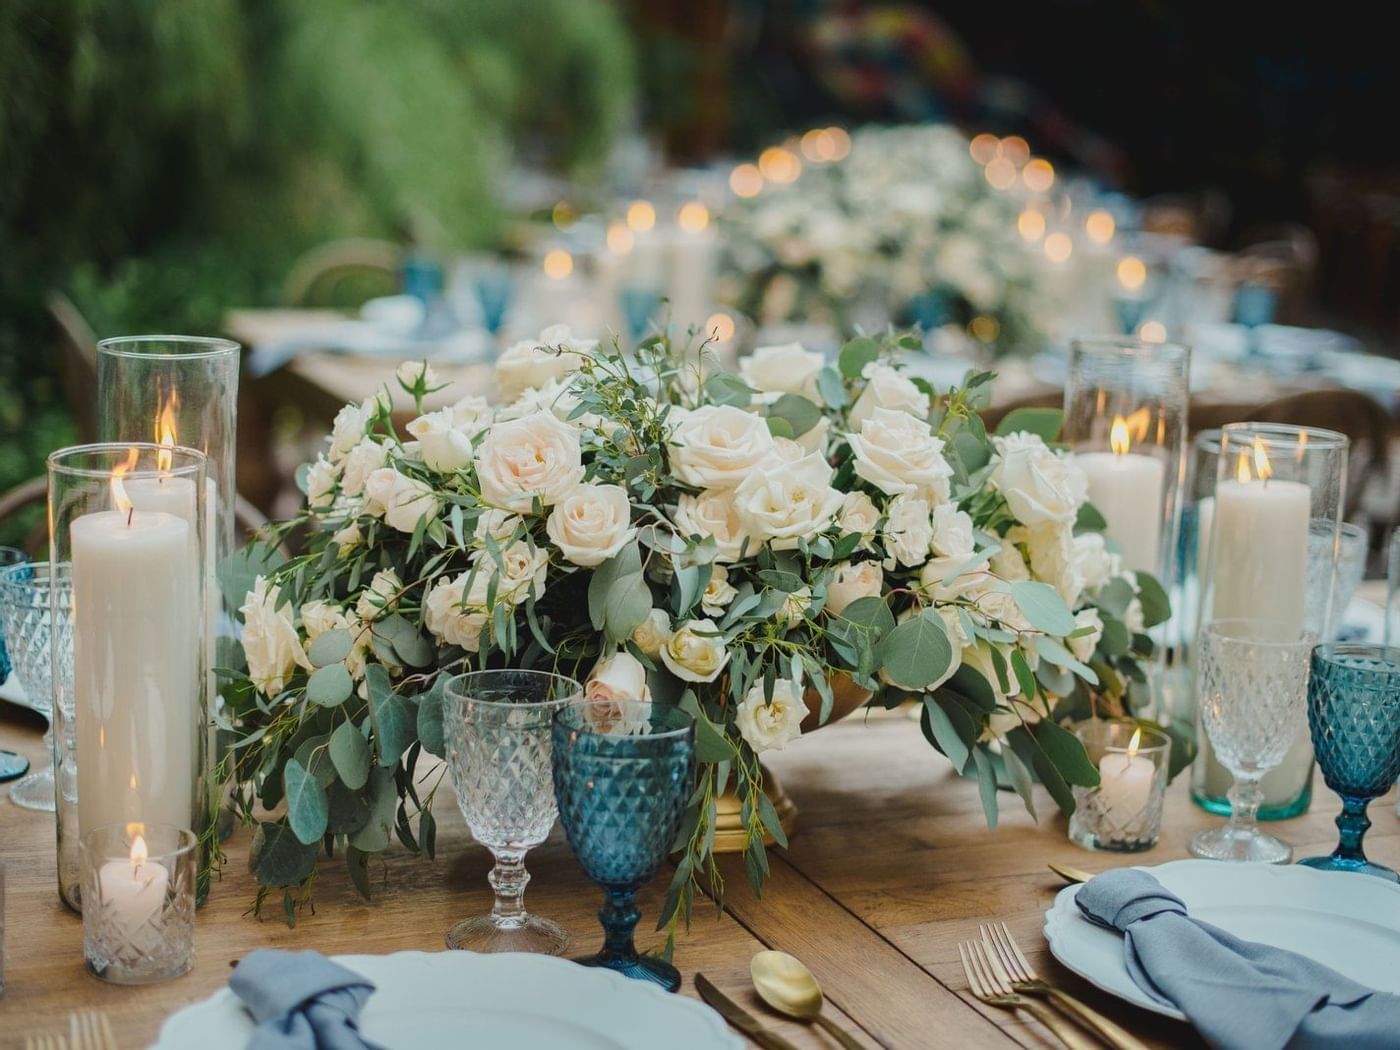 Floral wedding table décor at Fiesta Americana Travelty